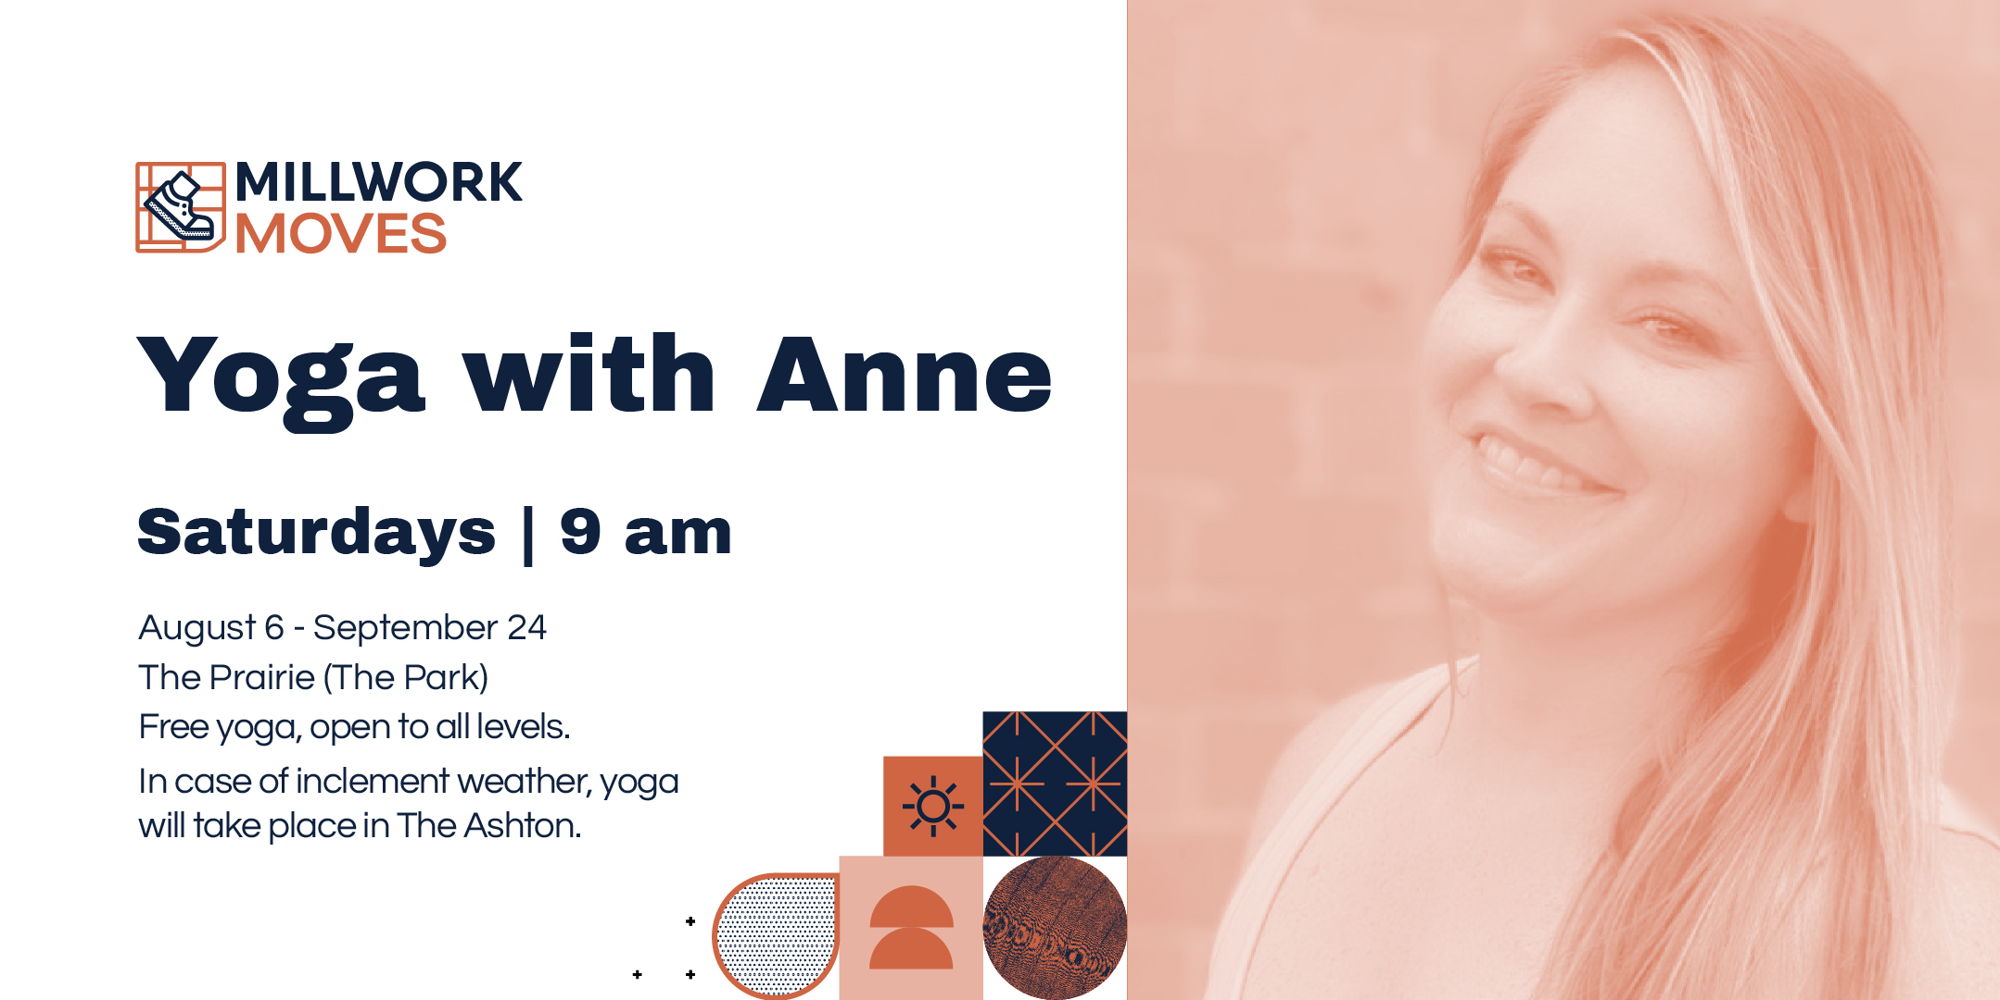 Millwork Moves: Yoga with Anne promotional image